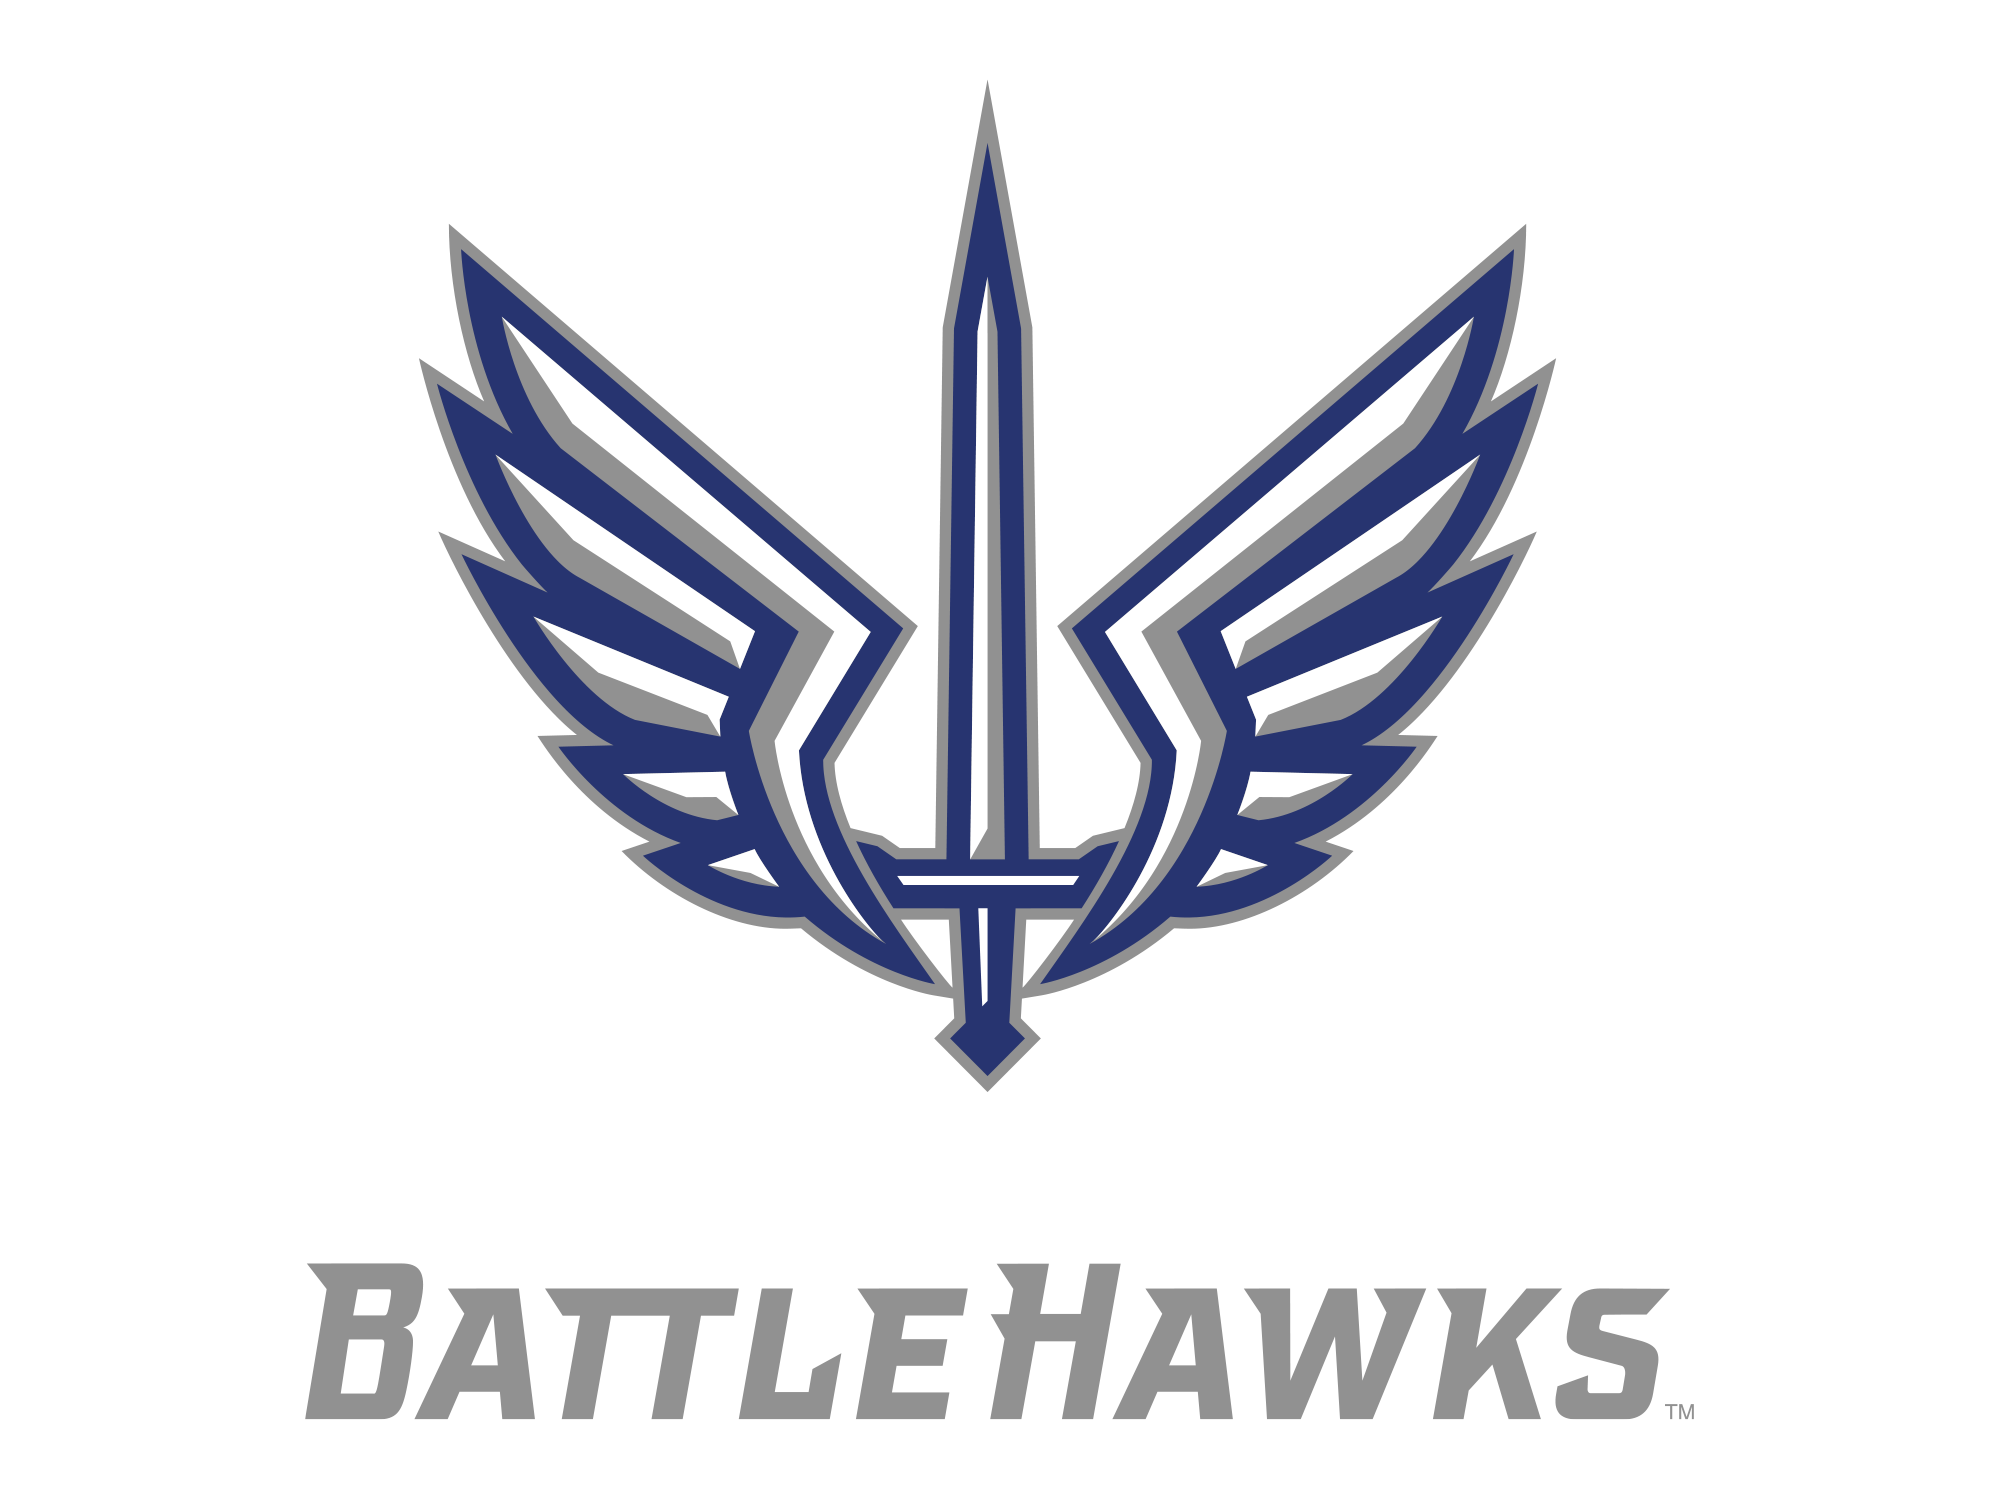 Keeping Up with the St. Louis BattleHawks